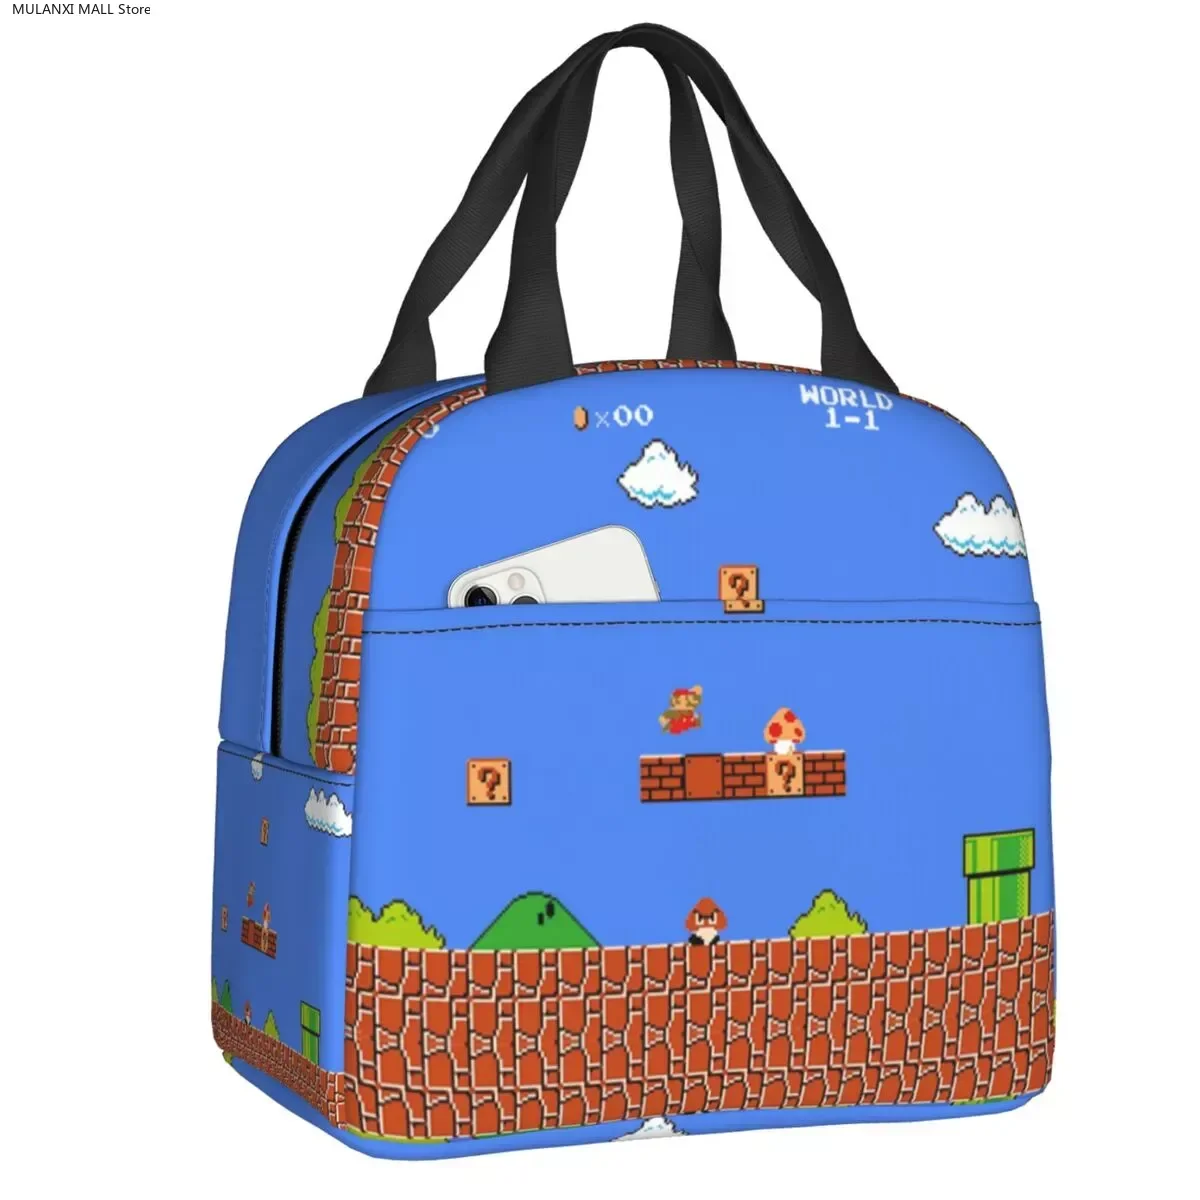 

Cartoon Super Mushroom Game Marios Thermal Insulated Lunch Bag Women Portable Lunch Box for School Multifunction Food Tote Bags